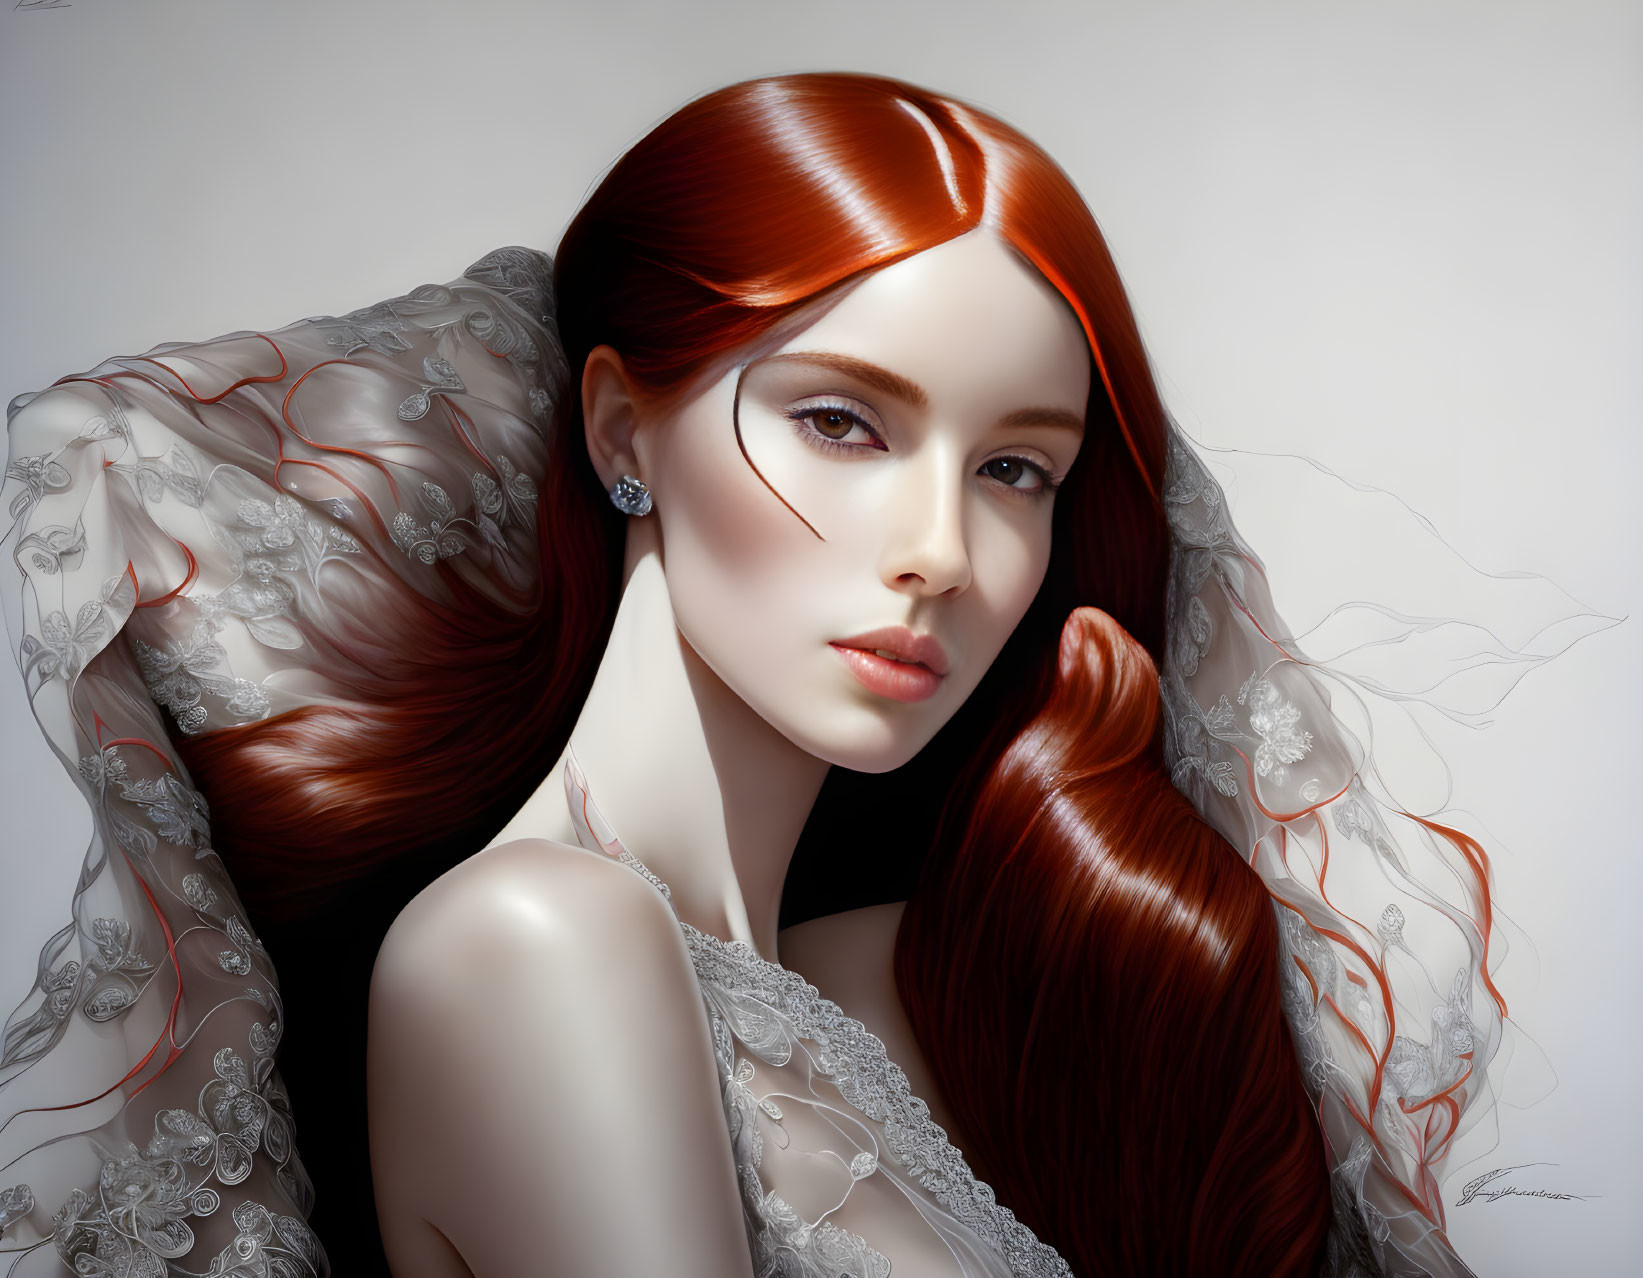 Digital artwork: Woman with red hair and lace shawl